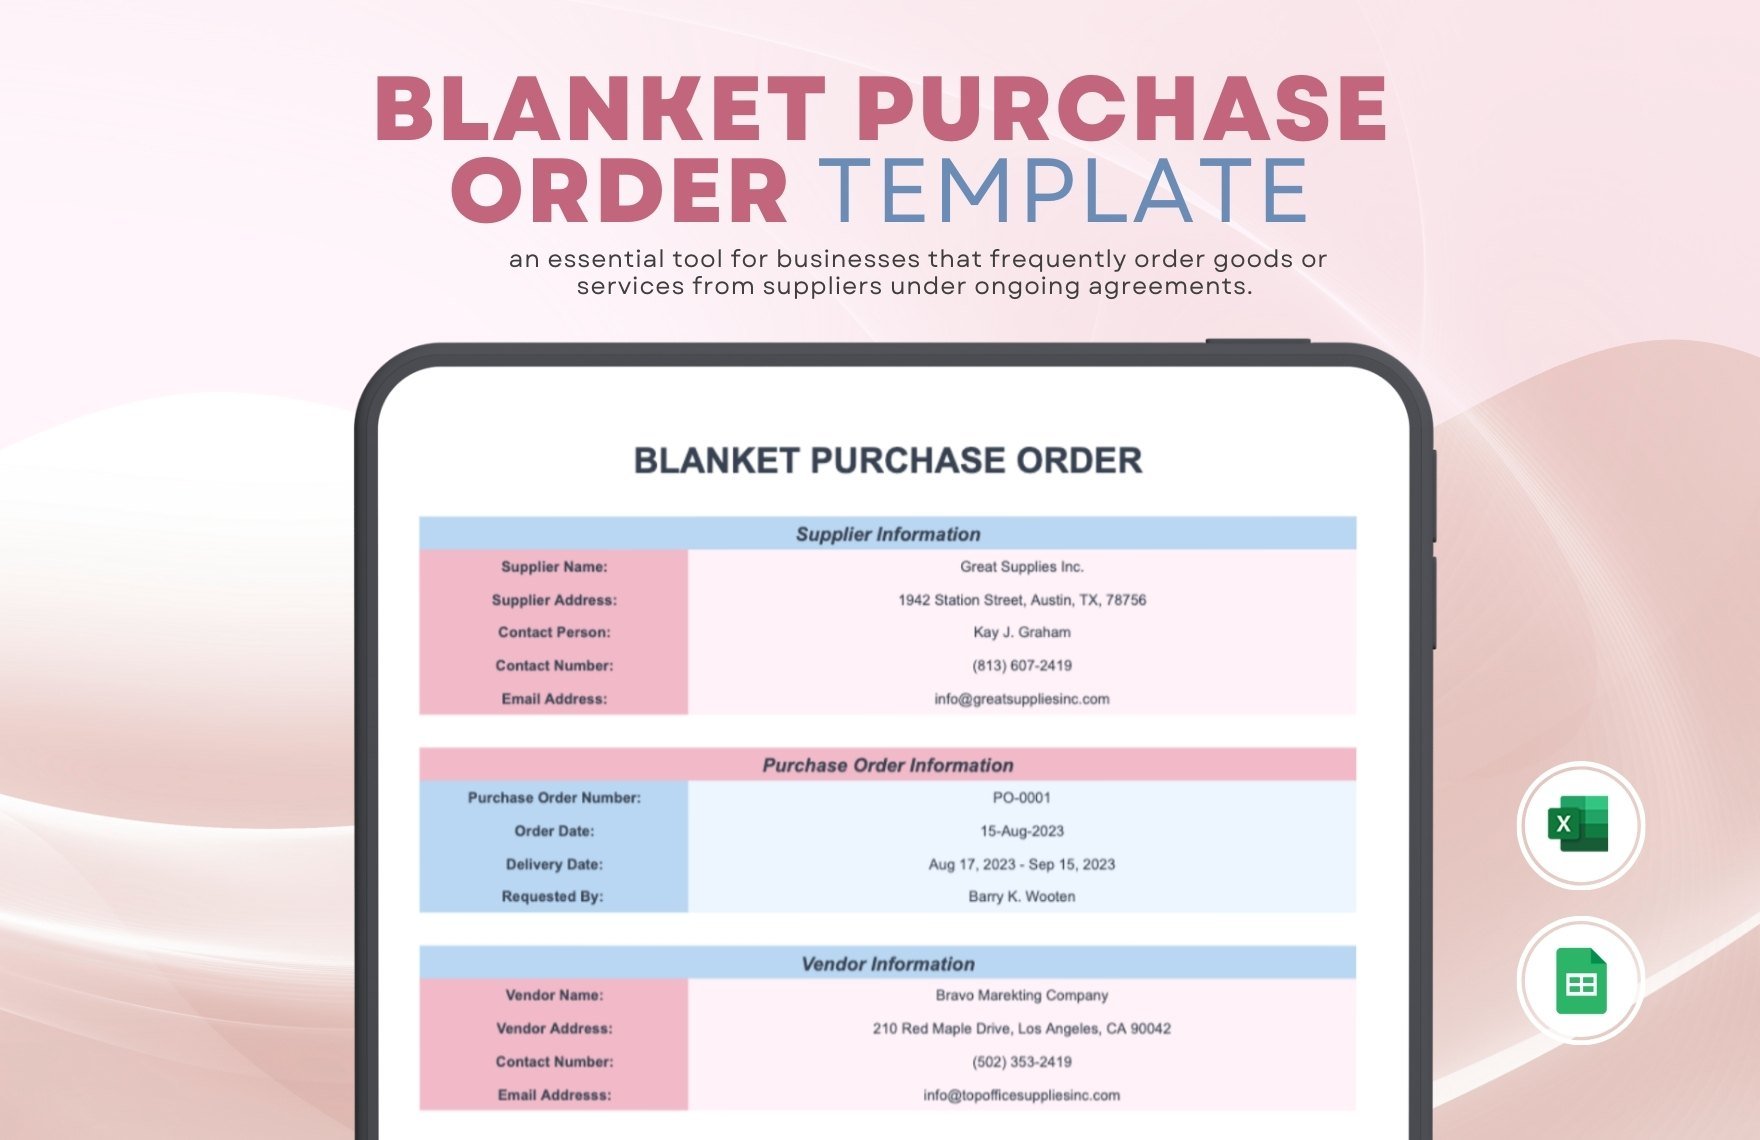 Free Blanket Purchase Order Template in Excel, Google Sheets